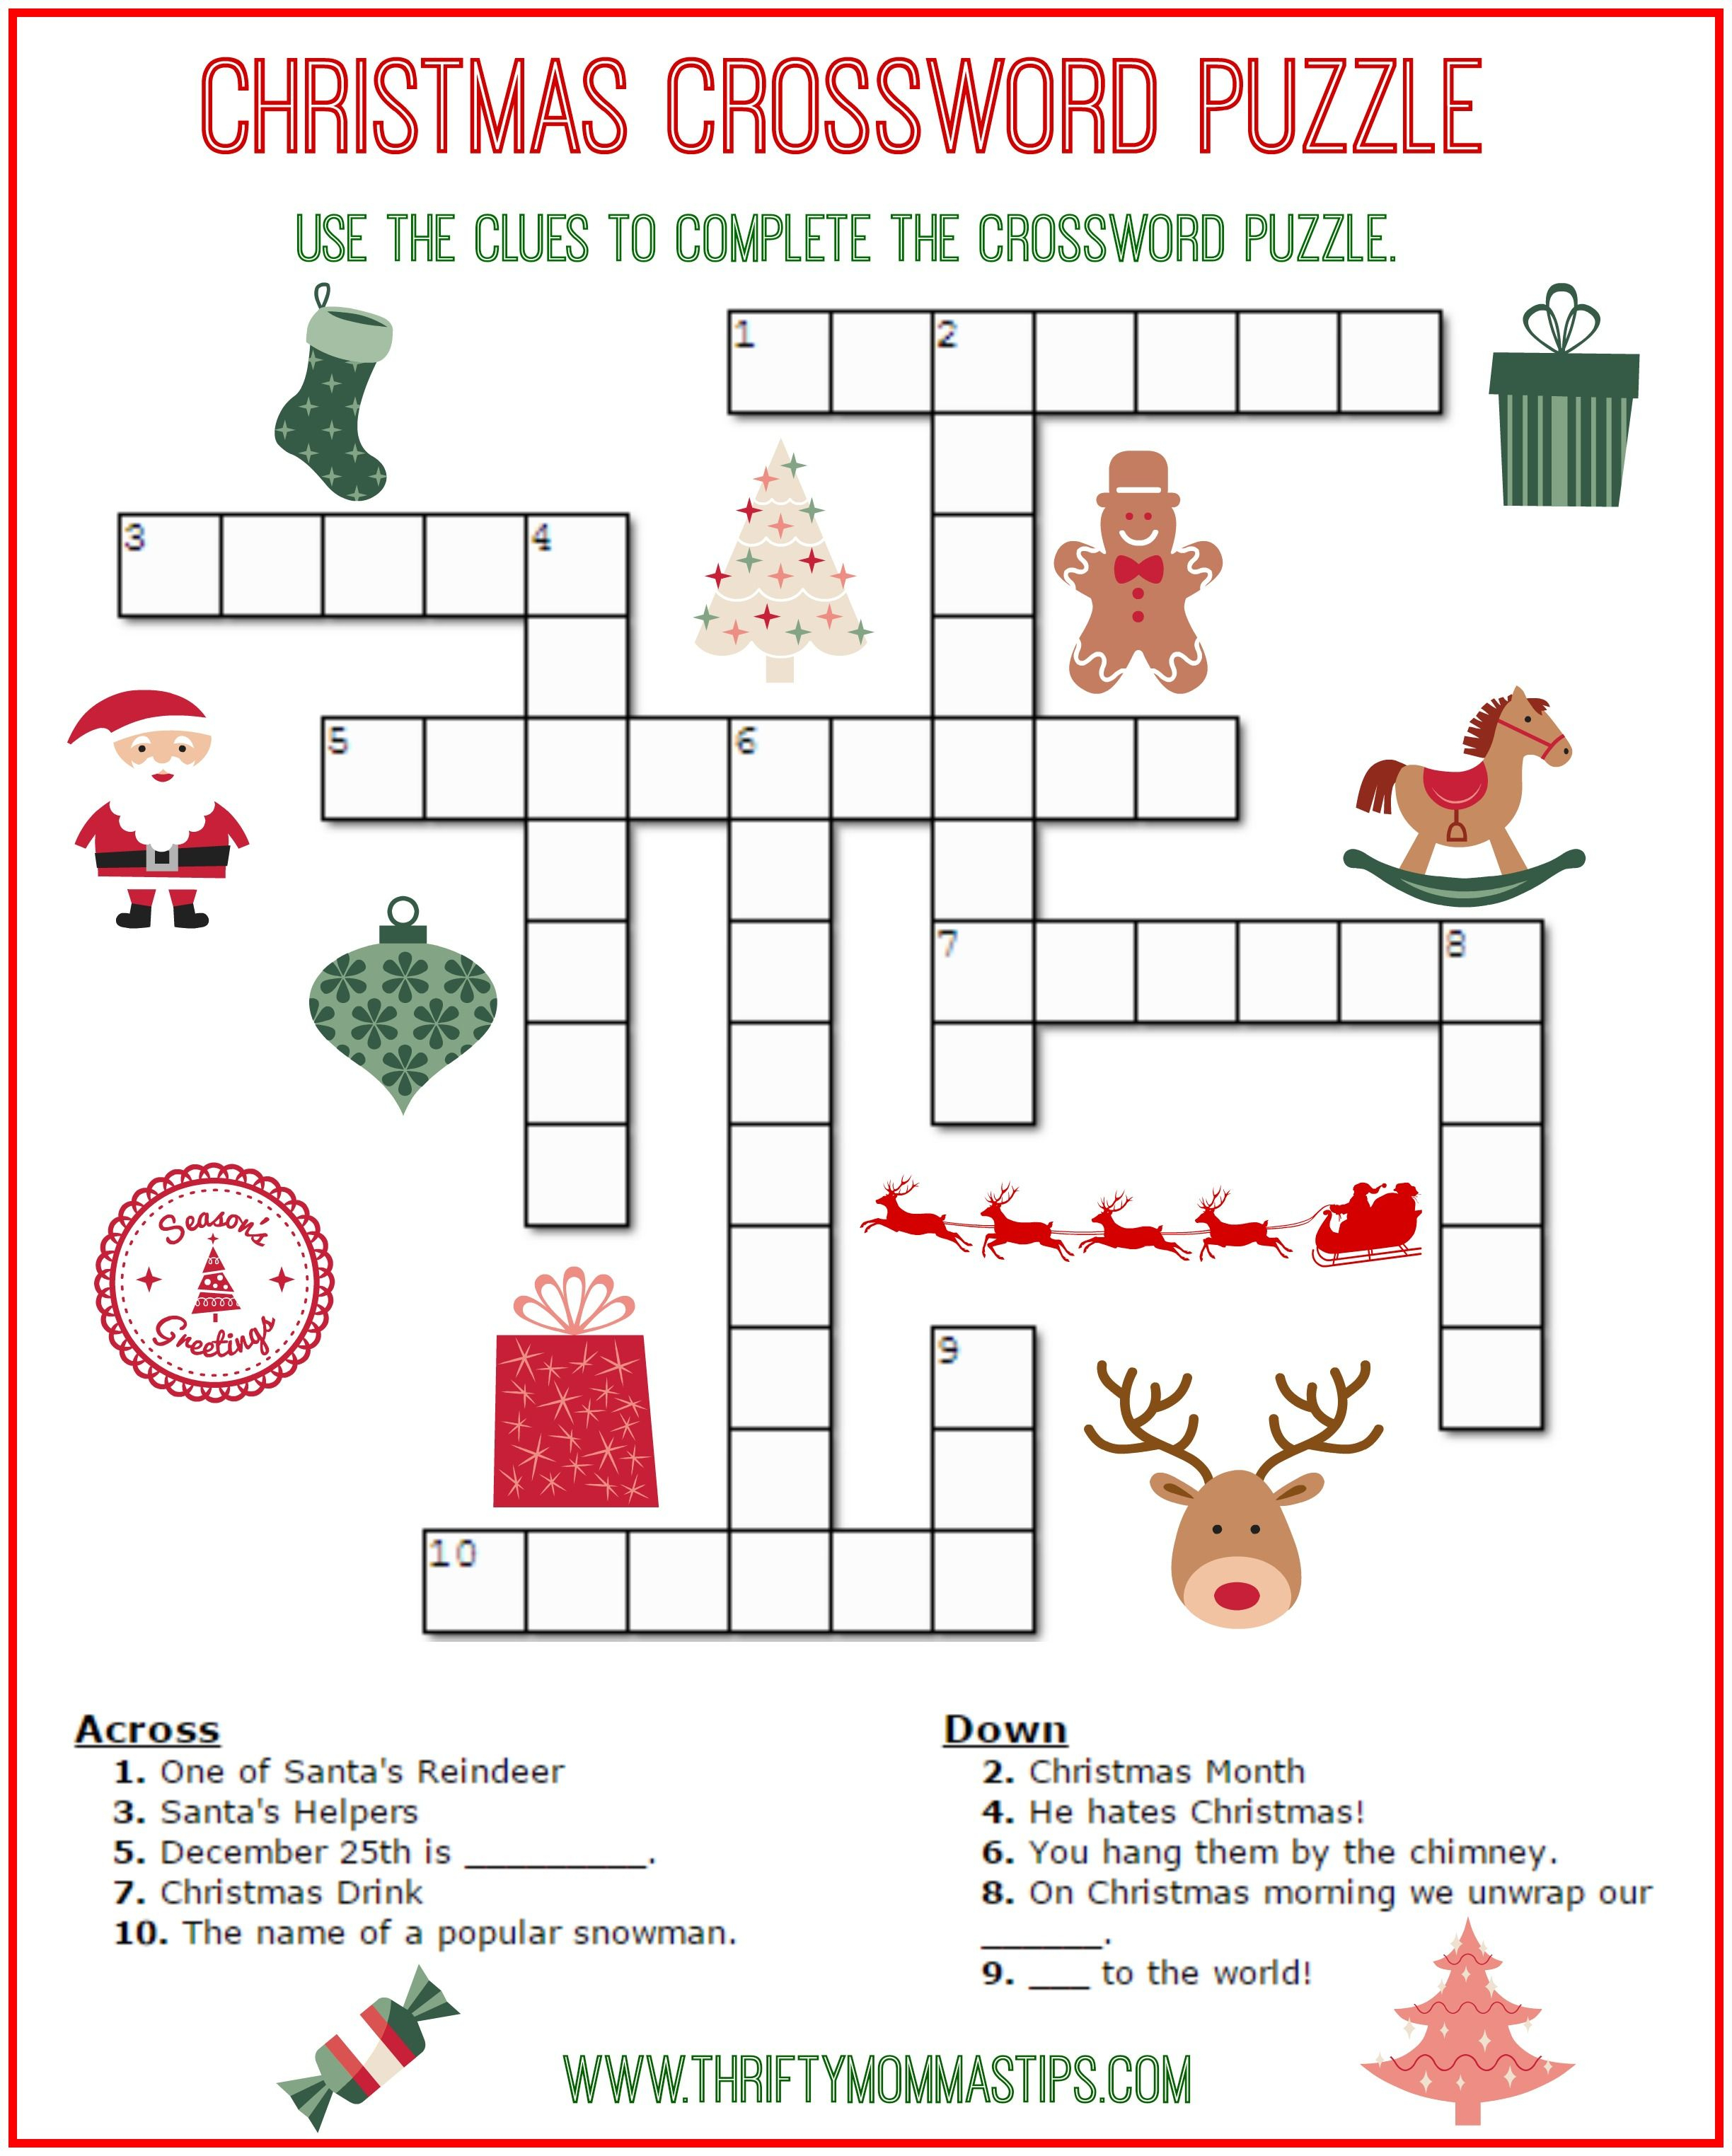 Christmas Crossword Puzzle Printable Thrifty Mommas Tips Uirq7Lrq - Printable Reverse Crossword Puzzle